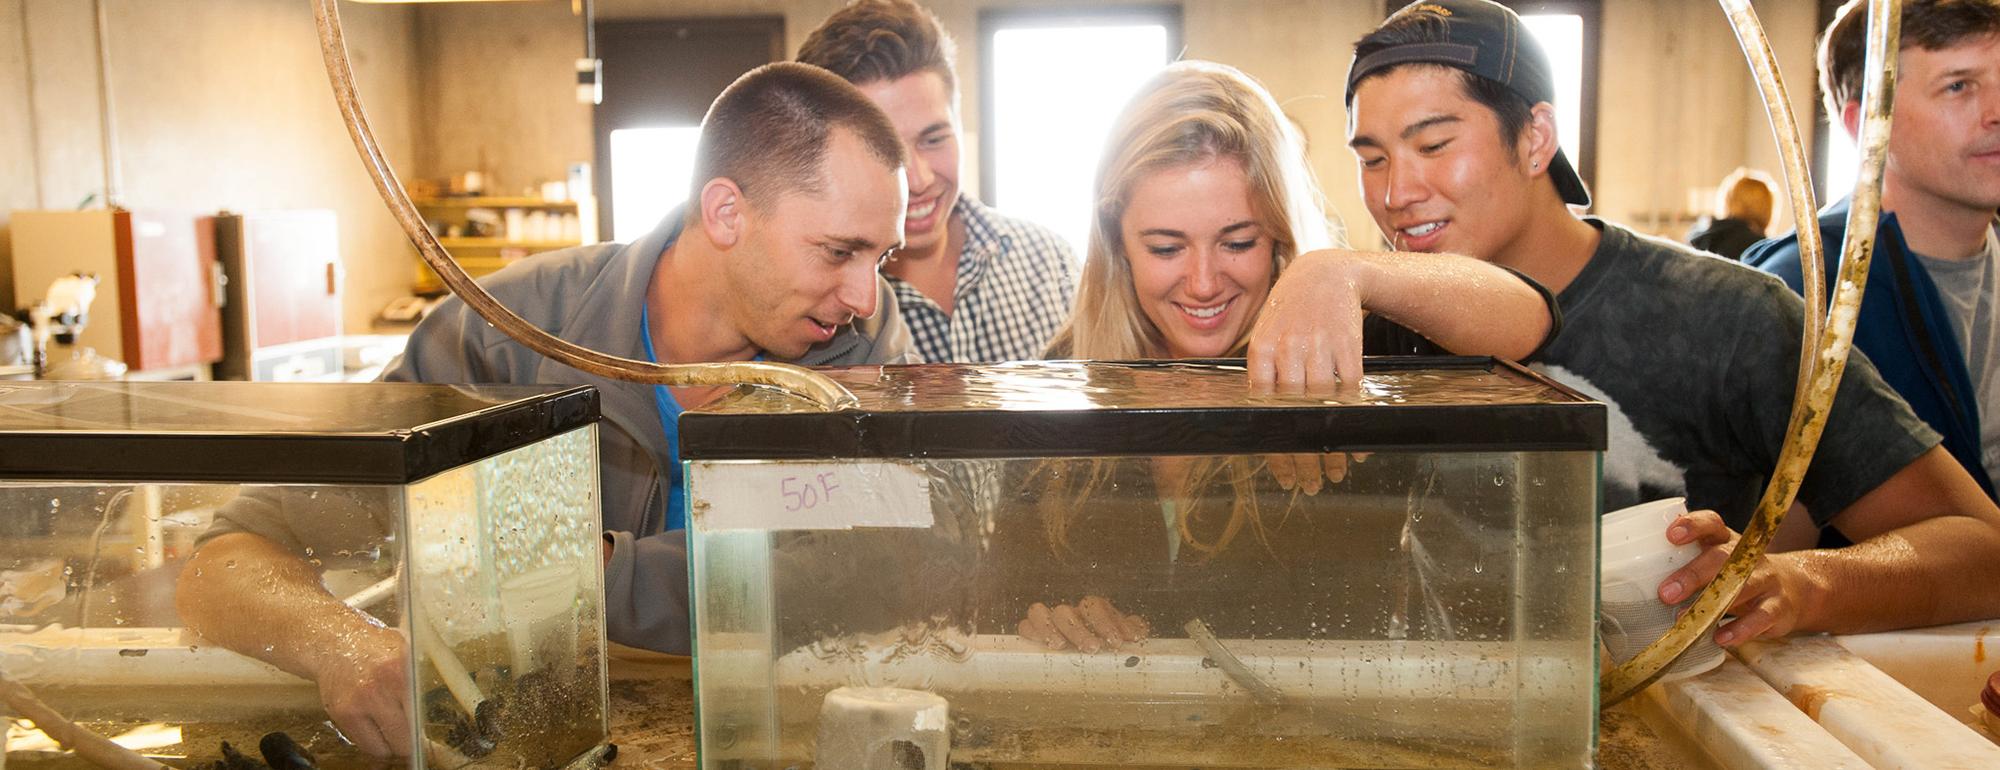 Students gathered around a tank full of marine creatures. One student is dipping their hand into the water in the tank.